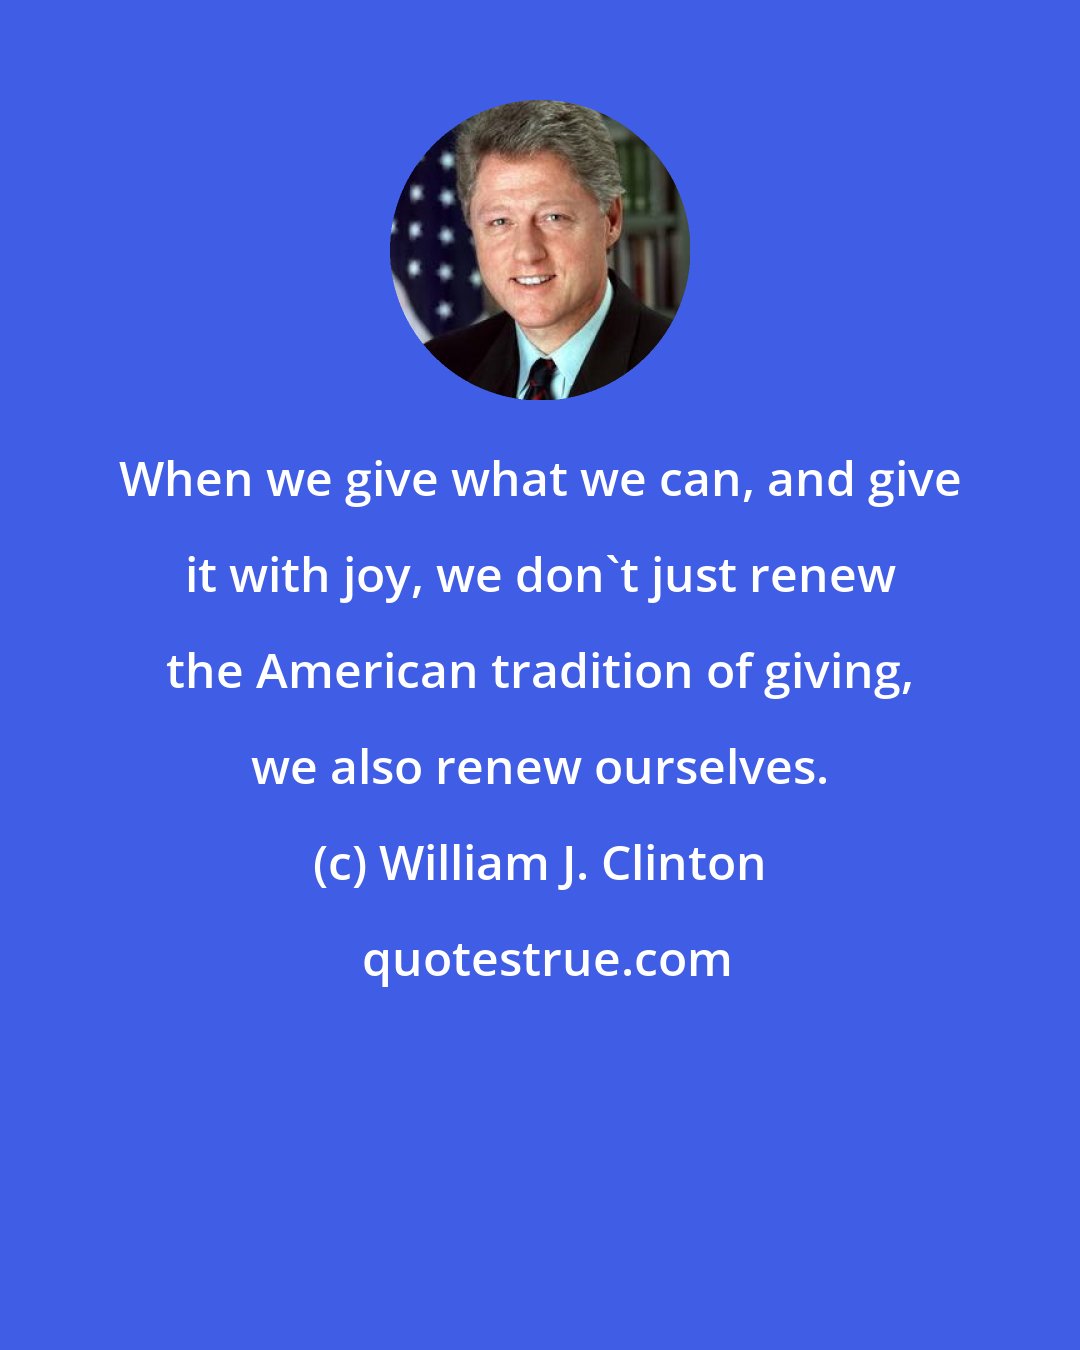 William J. Clinton: When we give what we can, and give it with joy, we don't just renew the American tradition of giving, we also renew ourselves.